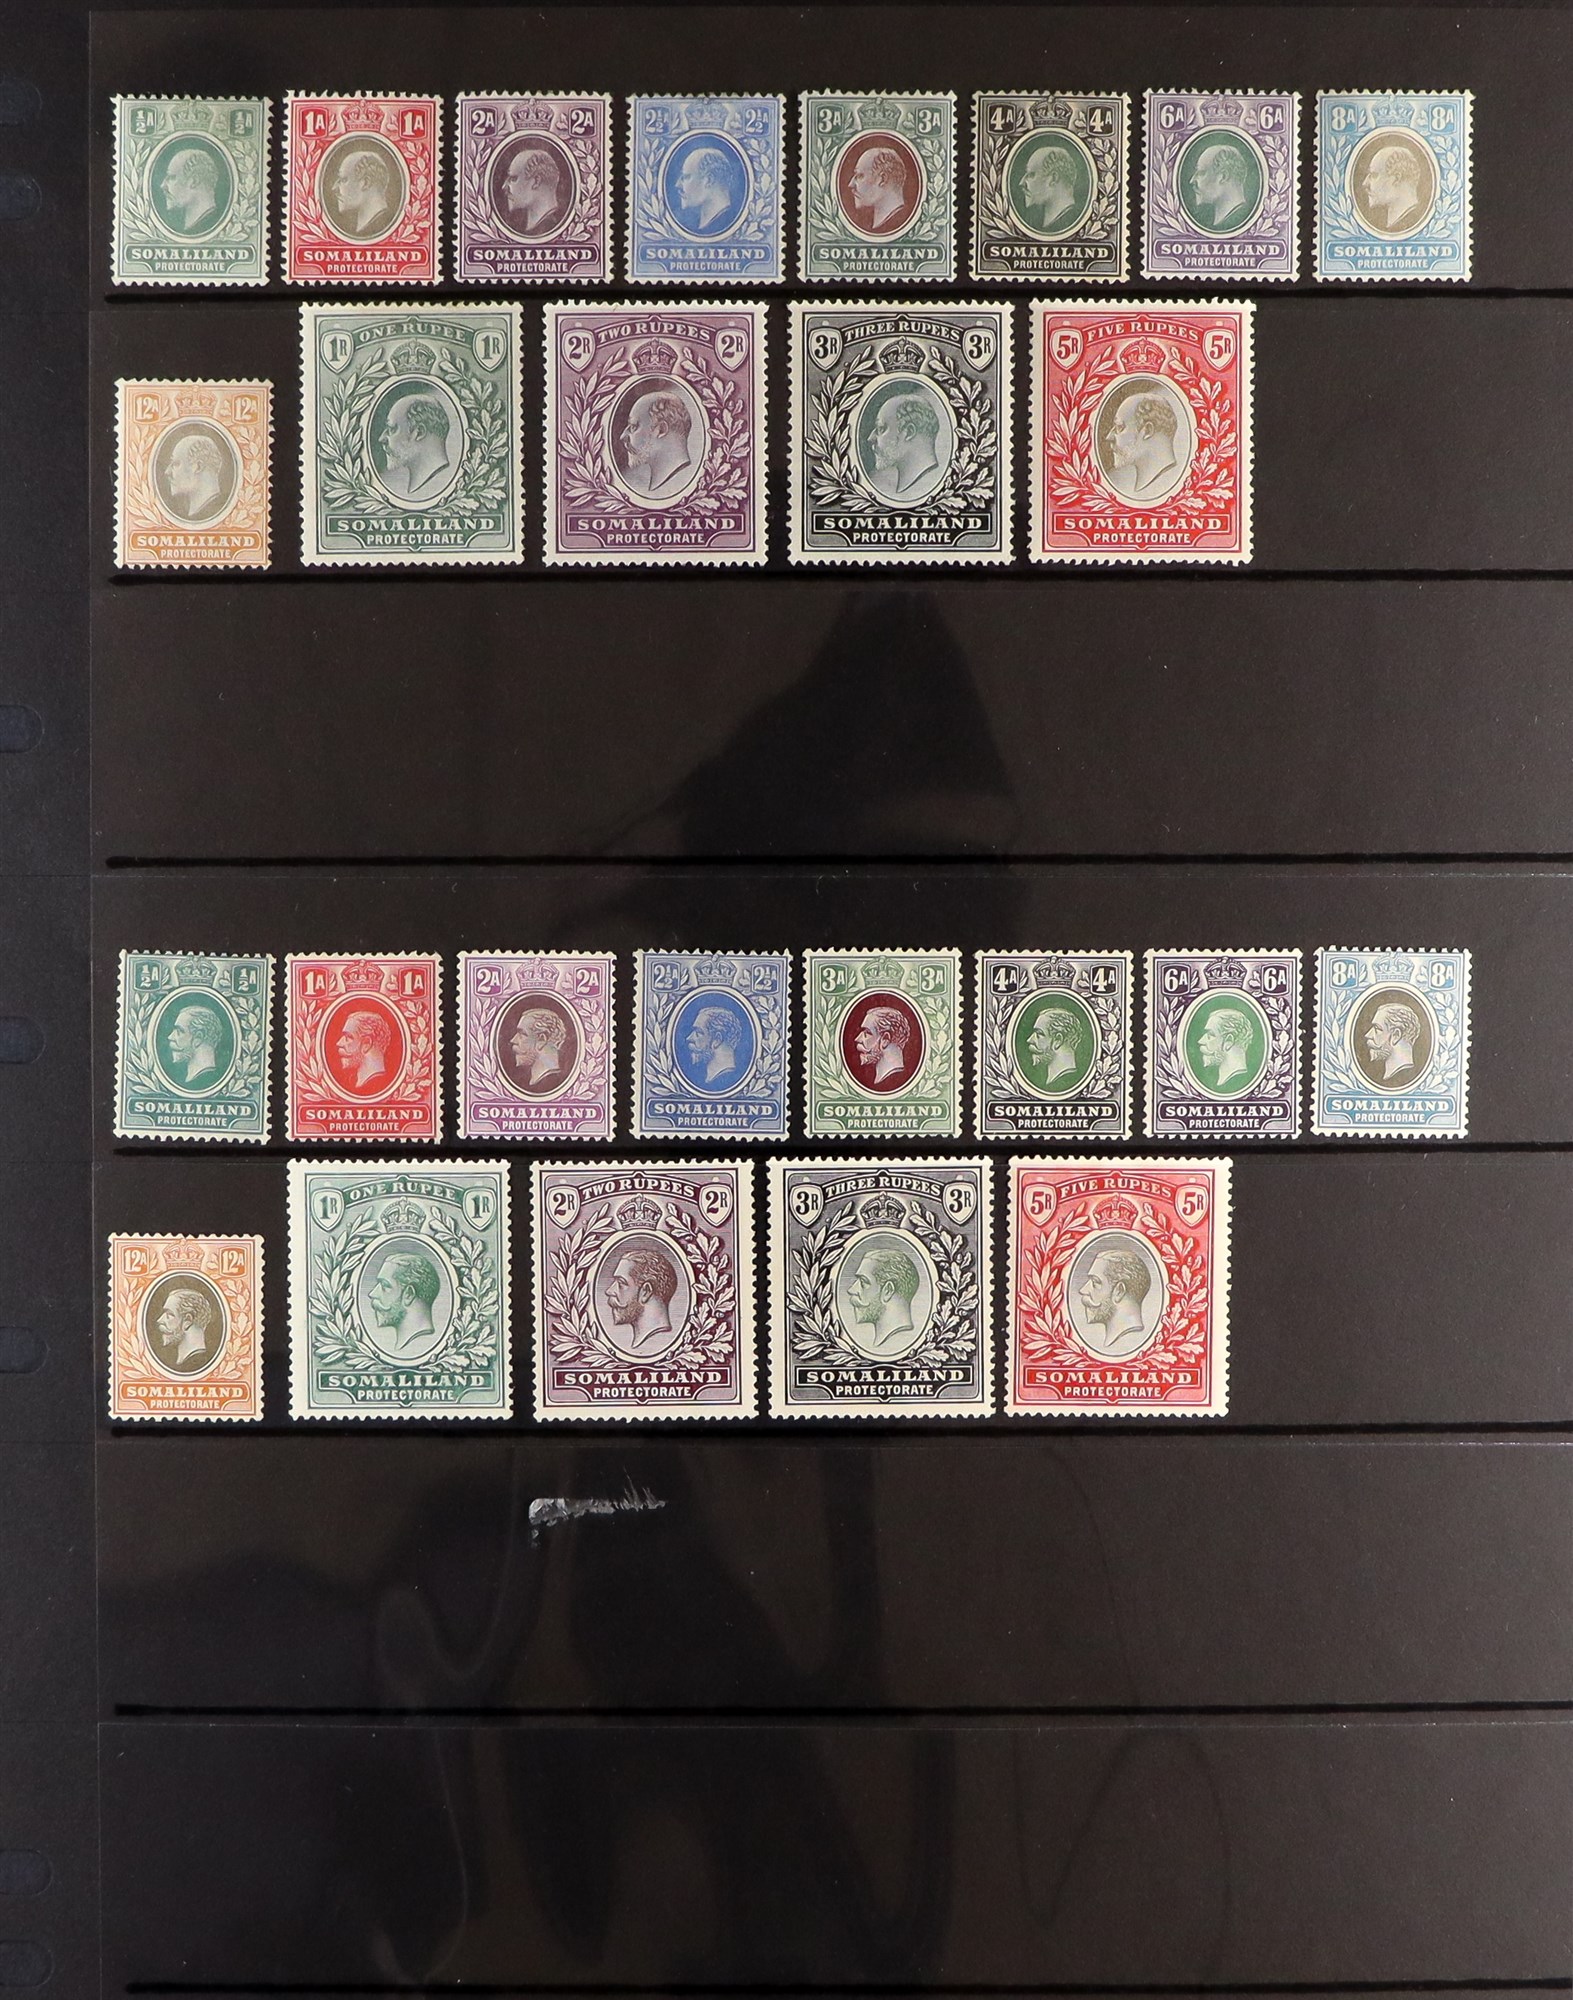 SOMALILAND PROTECT 1904 set (SG 32/44) and 1921 set (SG 73/85) mint. Cat. £500 (26 stamps) - Image 2 of 4